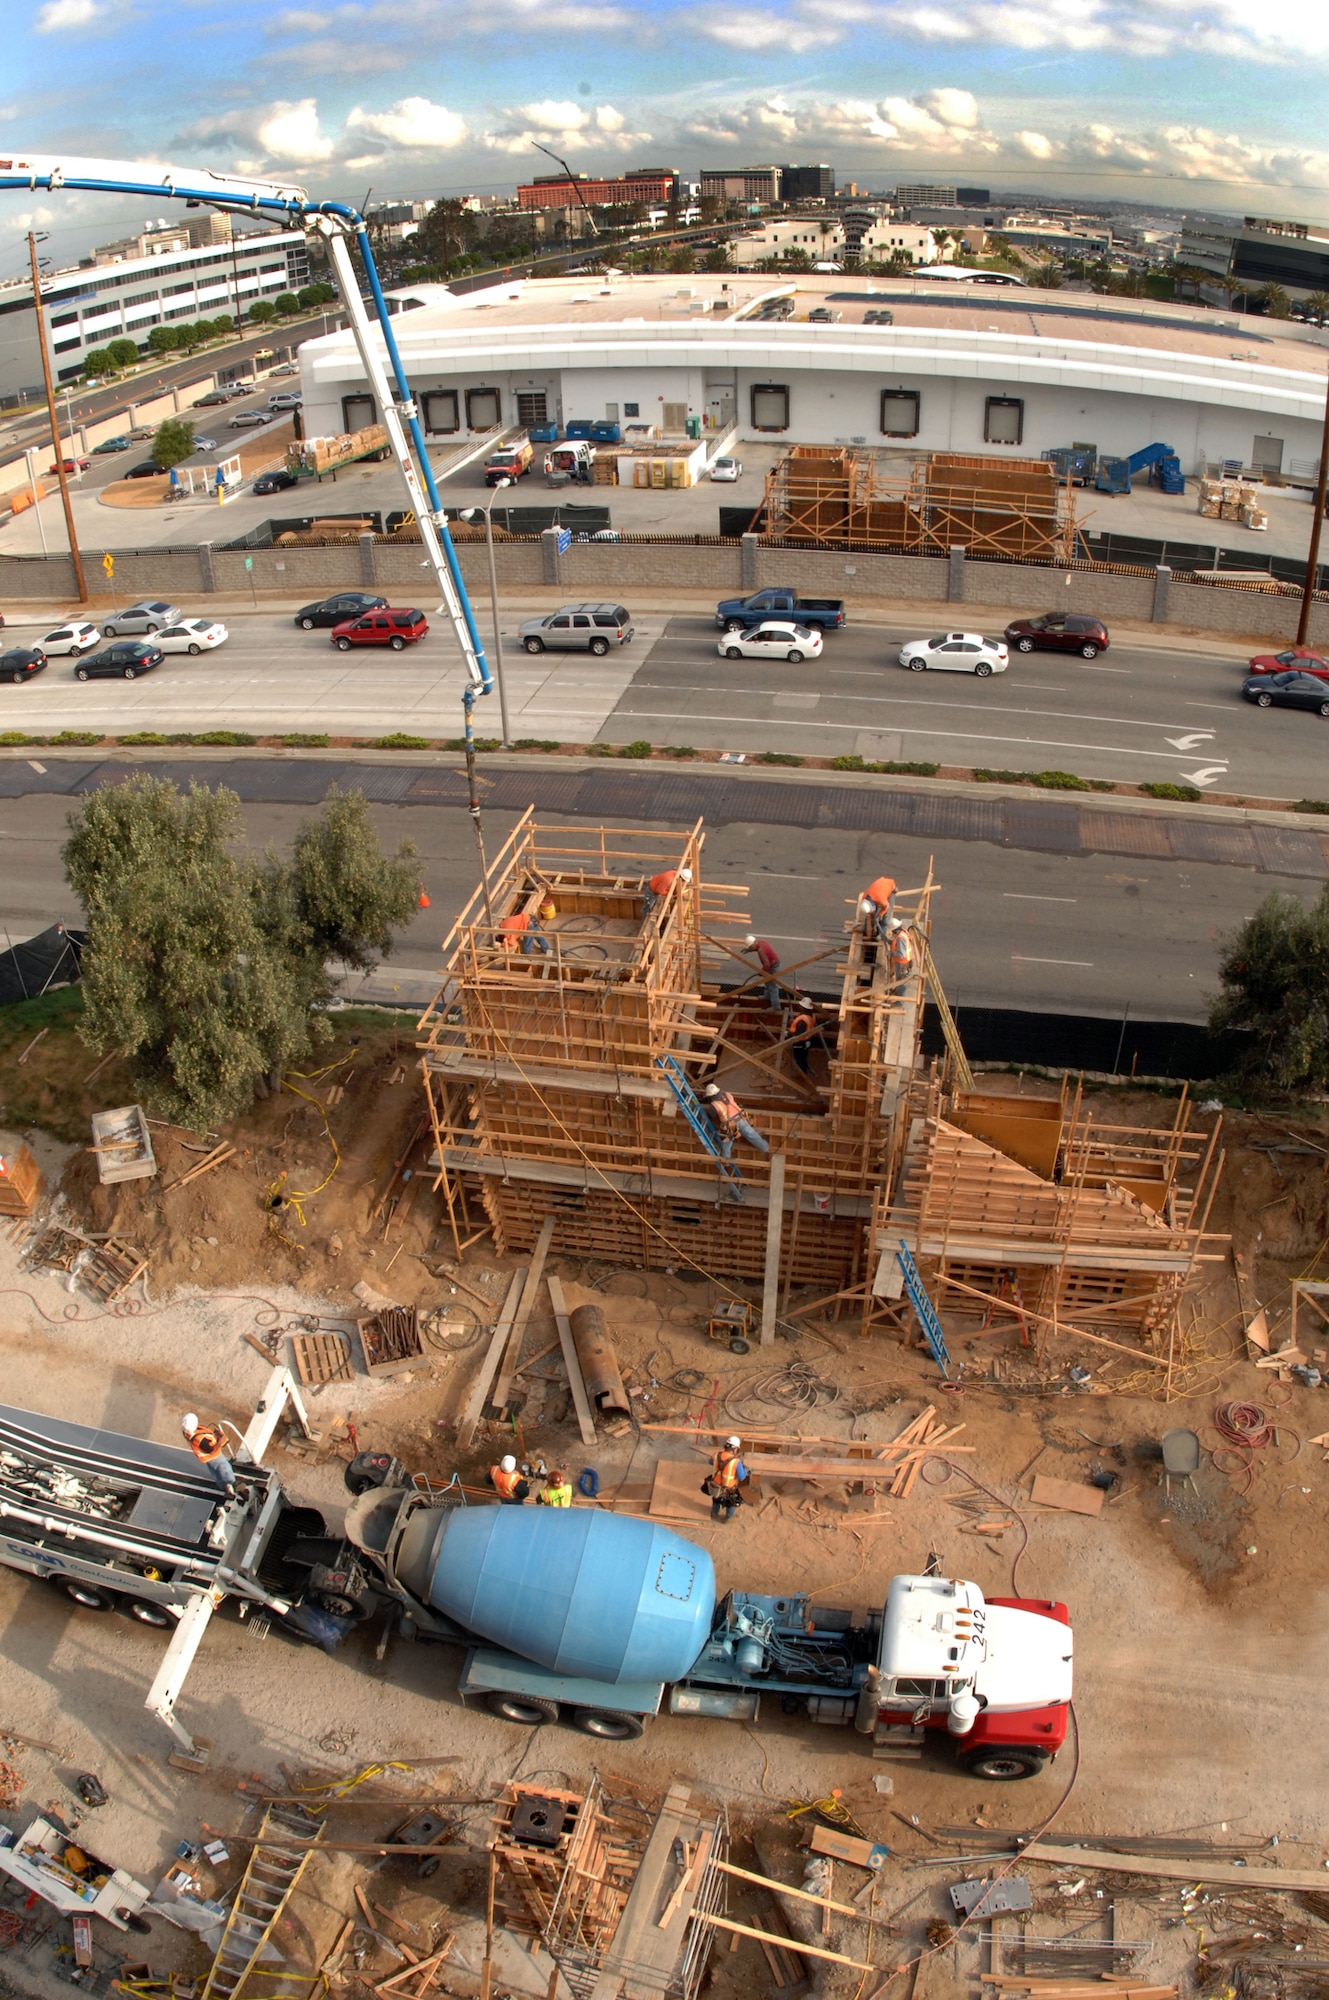 Work continues on the pedestrian bridge that will link Los Angeles Air Force Base with The Aerospace Corporation’s office area.  The bridge, spanning El Segundo Boulevard, is expected to be complete in September.  (Photo by Mike Morales, The Aerospace Corporation)